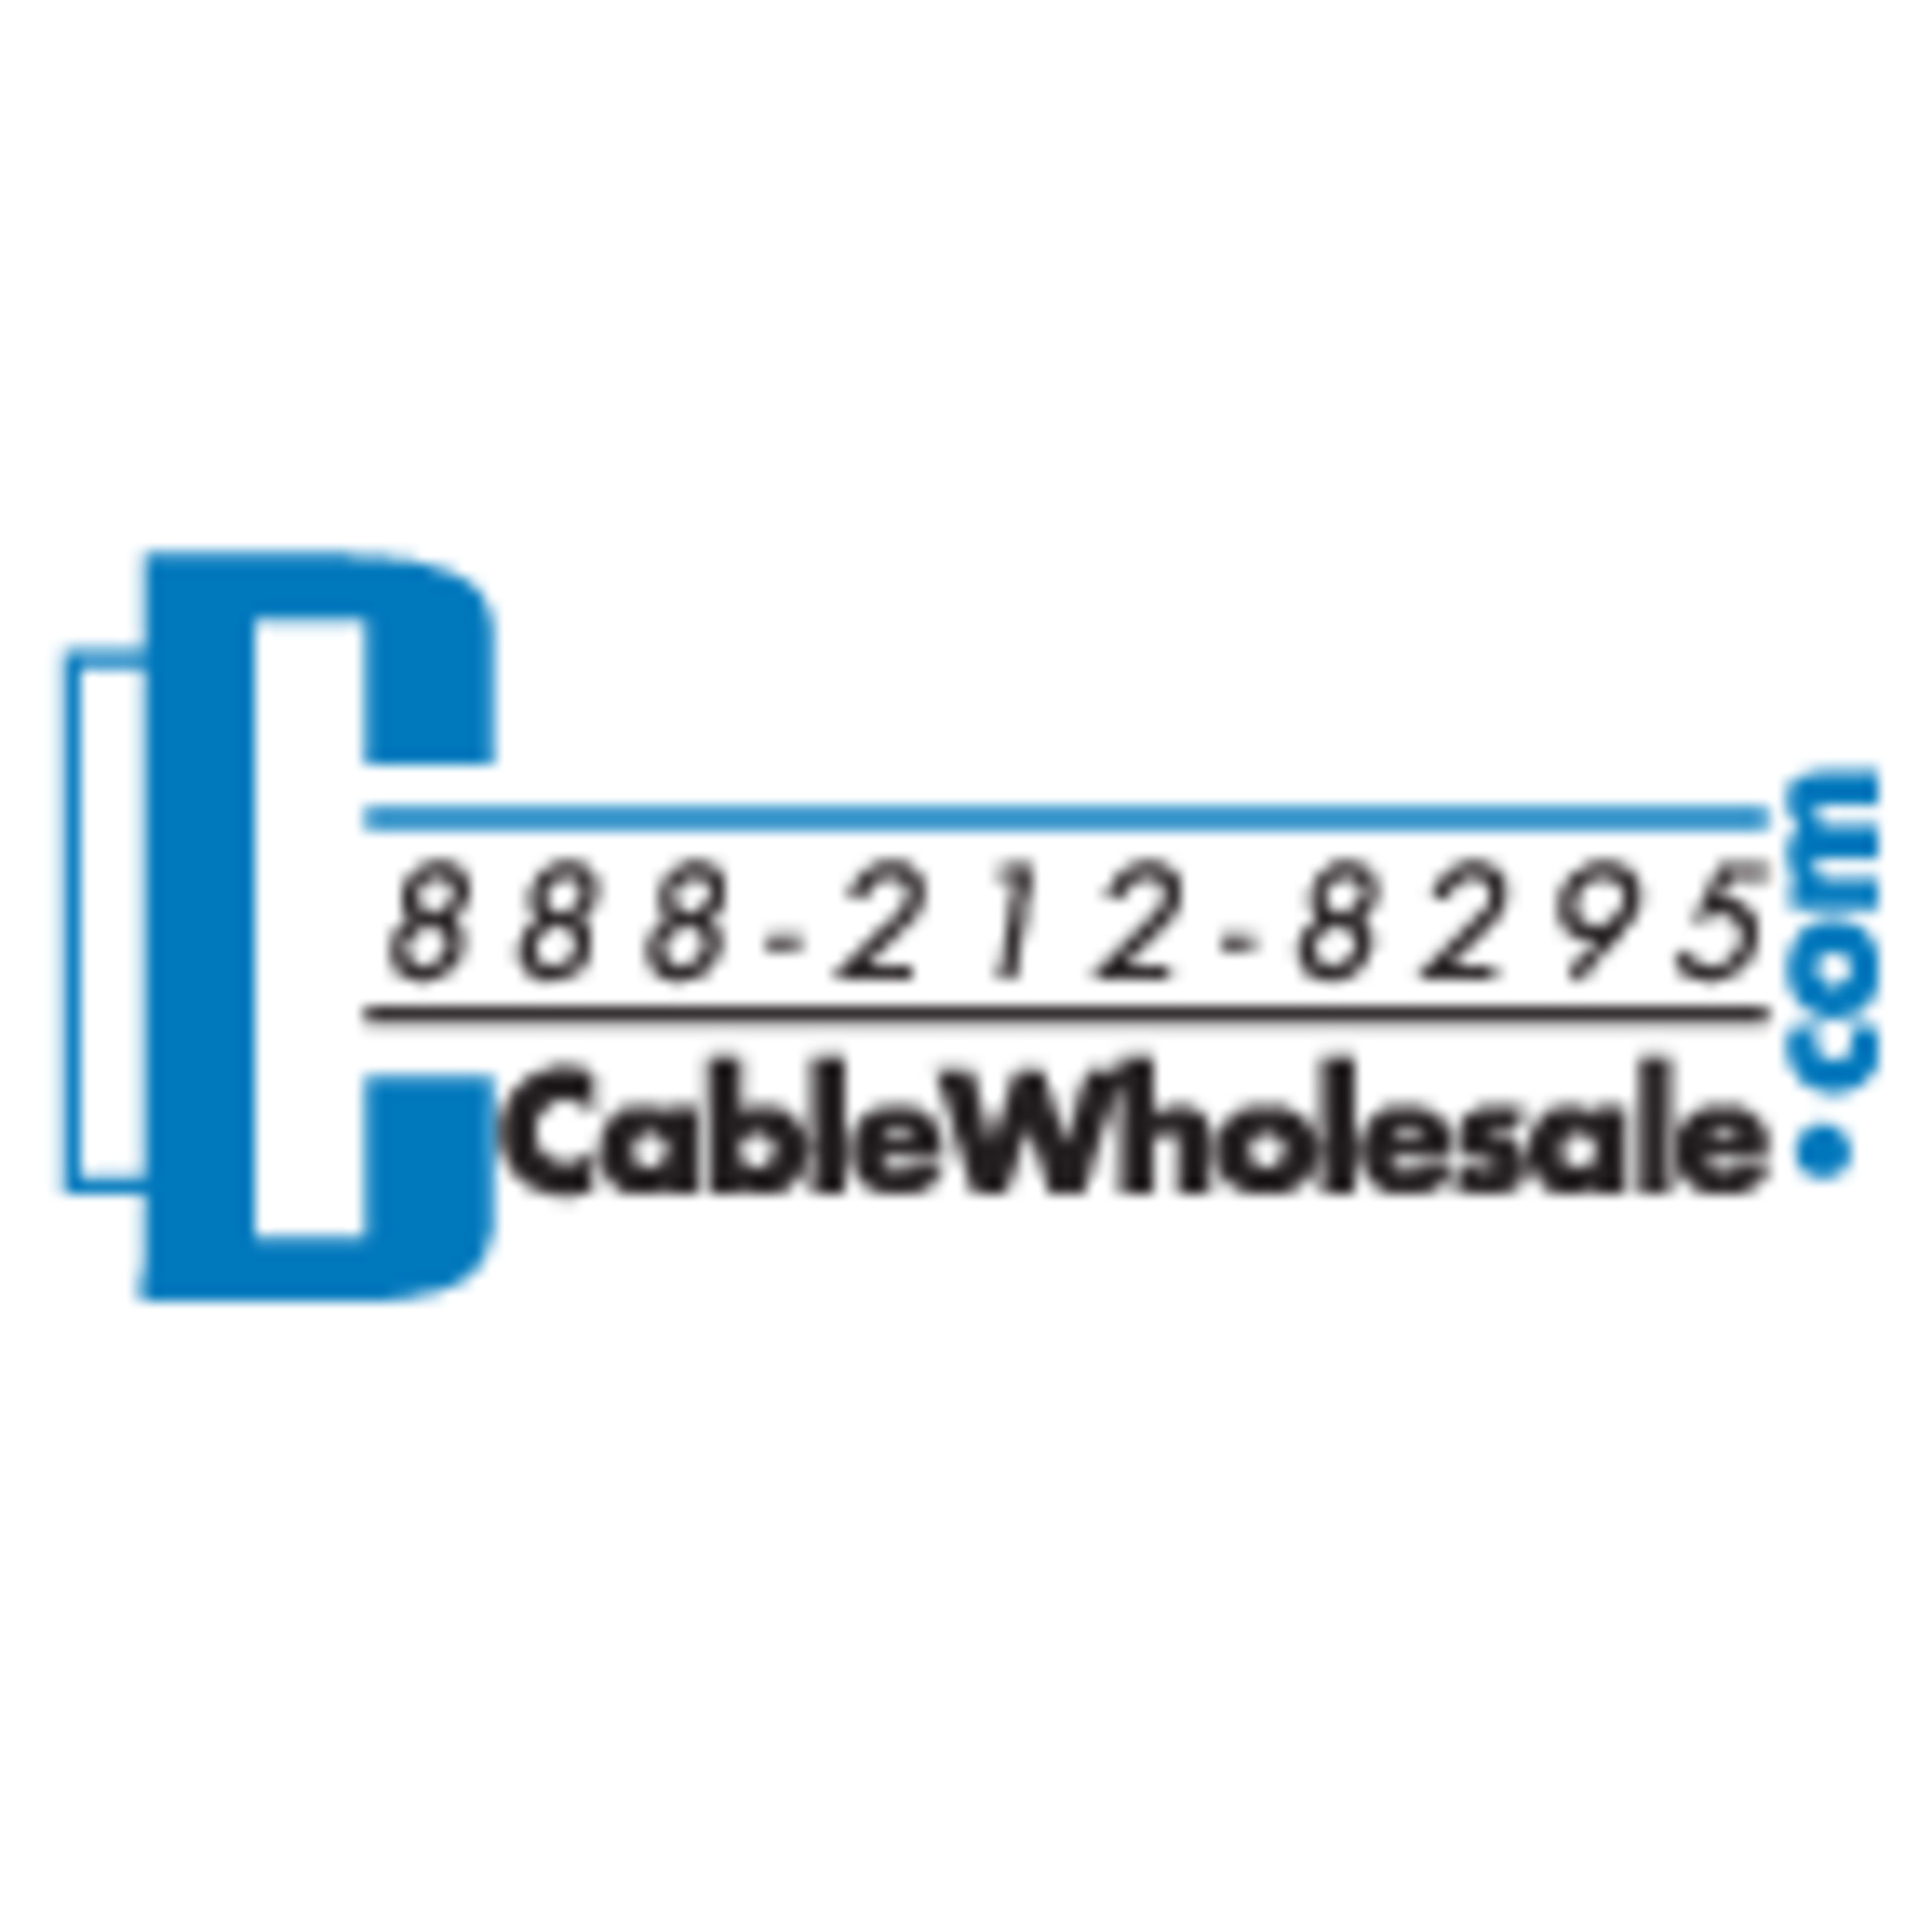 Cable WholesaleCode